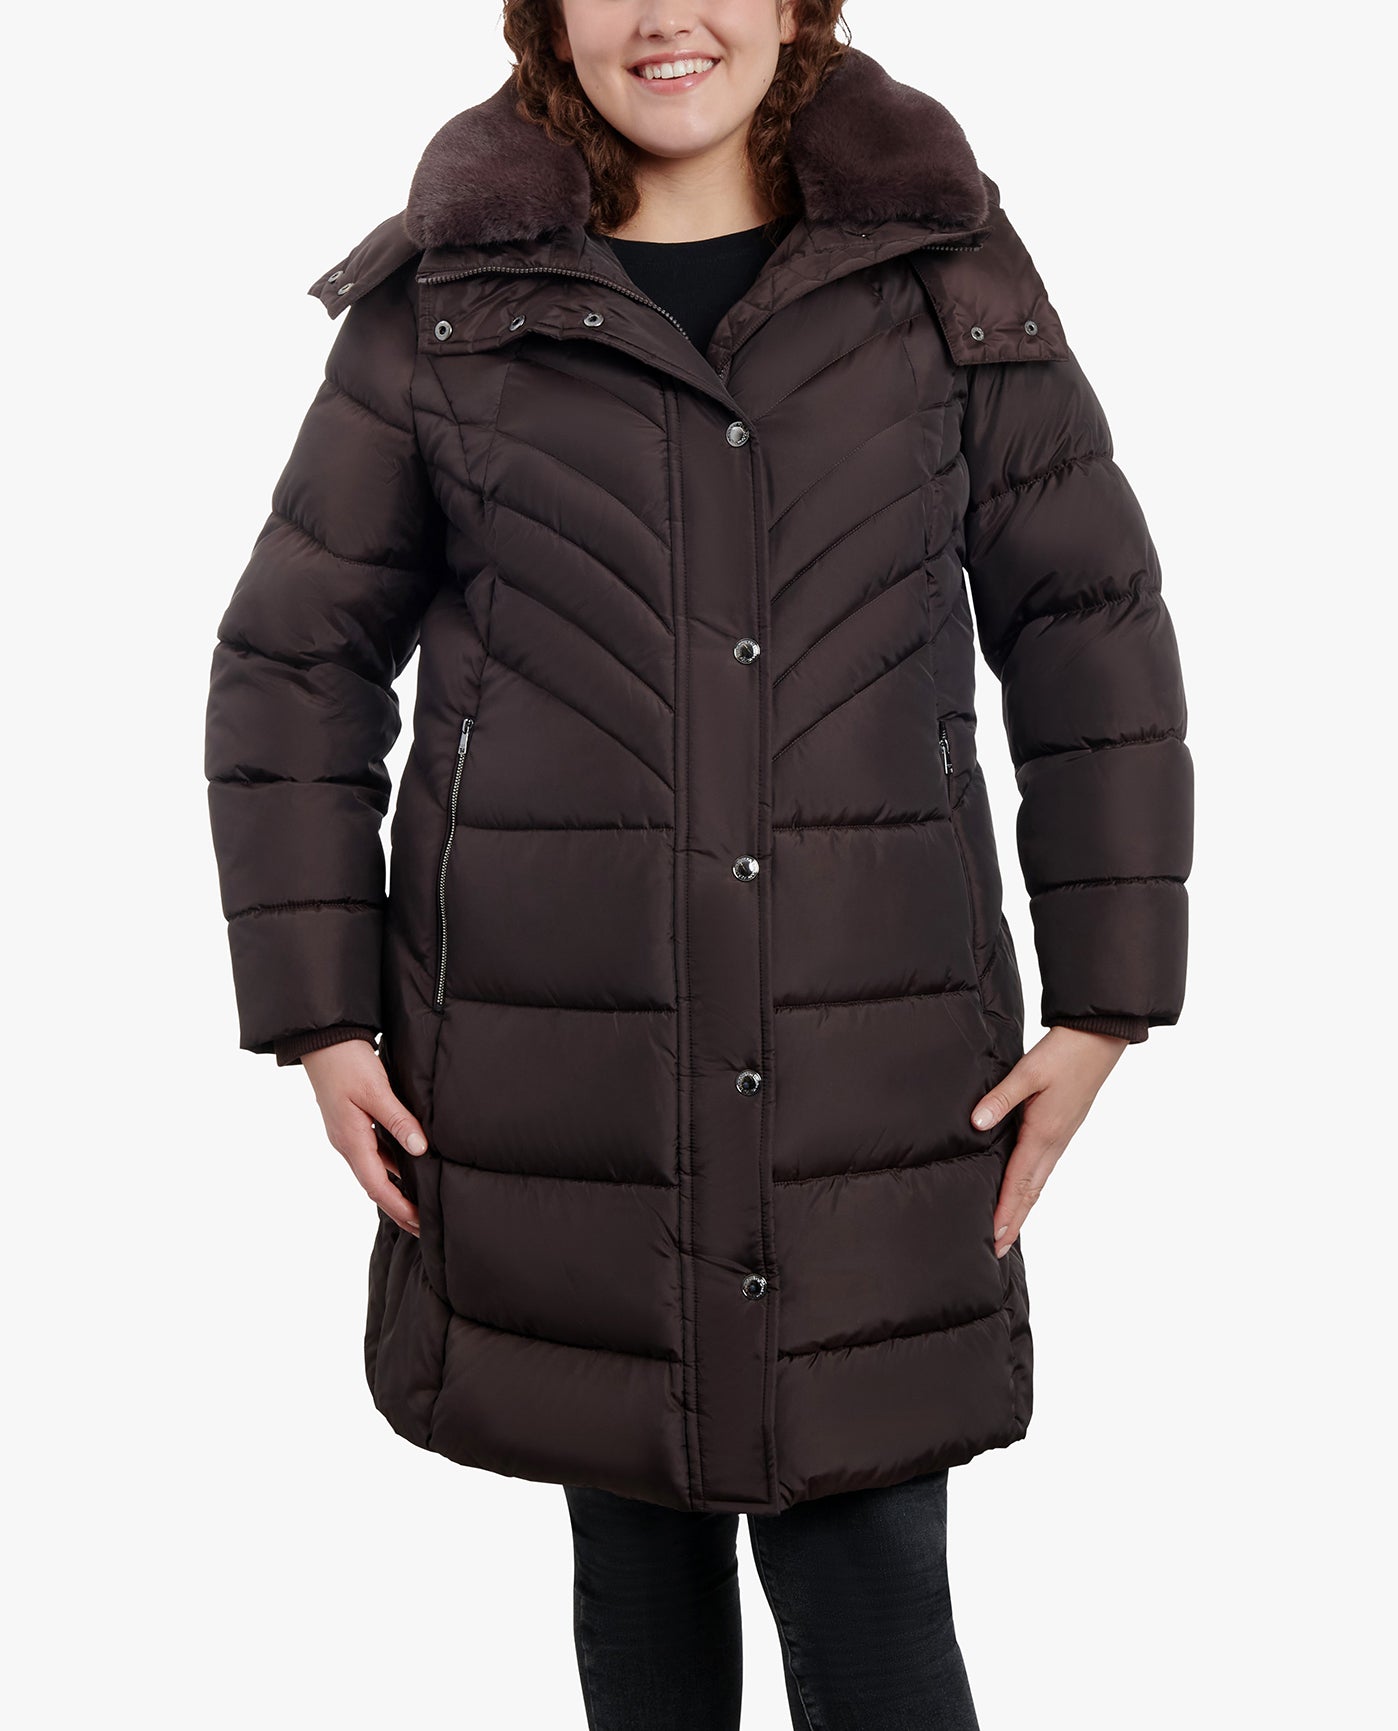 FRONT VIEW OF PLUS SIZE ZIP-FRONT HOODED HEAVY WEIGHT PUFFER JACKET WITH BUTTON-OFF FUR COLLAR | ESPRESSO